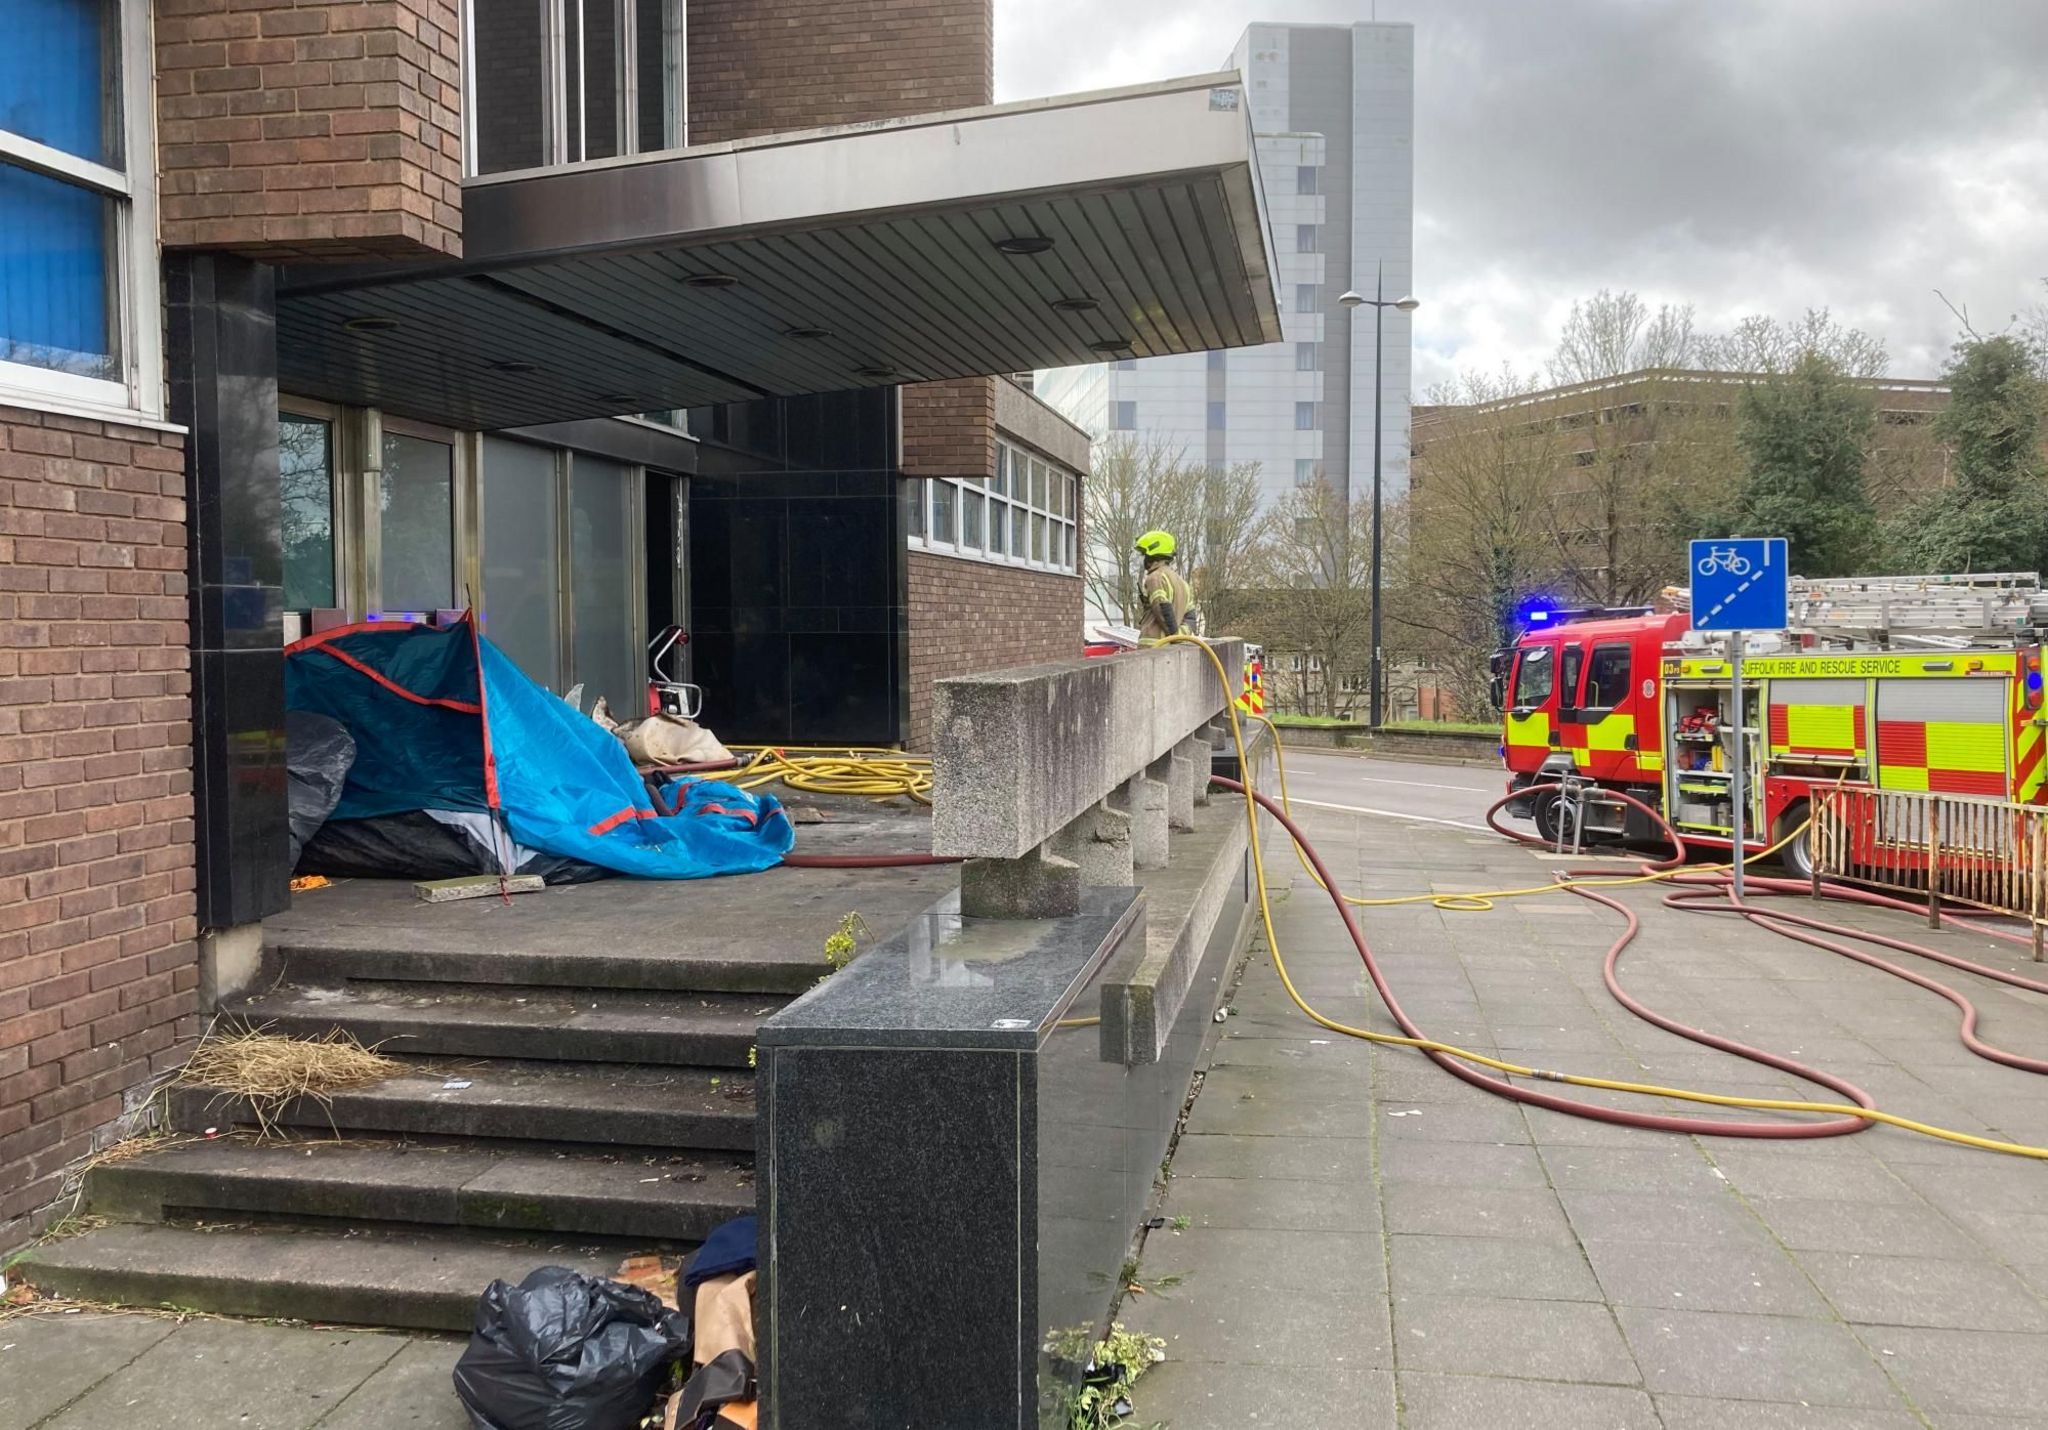 Tent on the steps of Ipswich's former crown court building with fire engines and hoses 